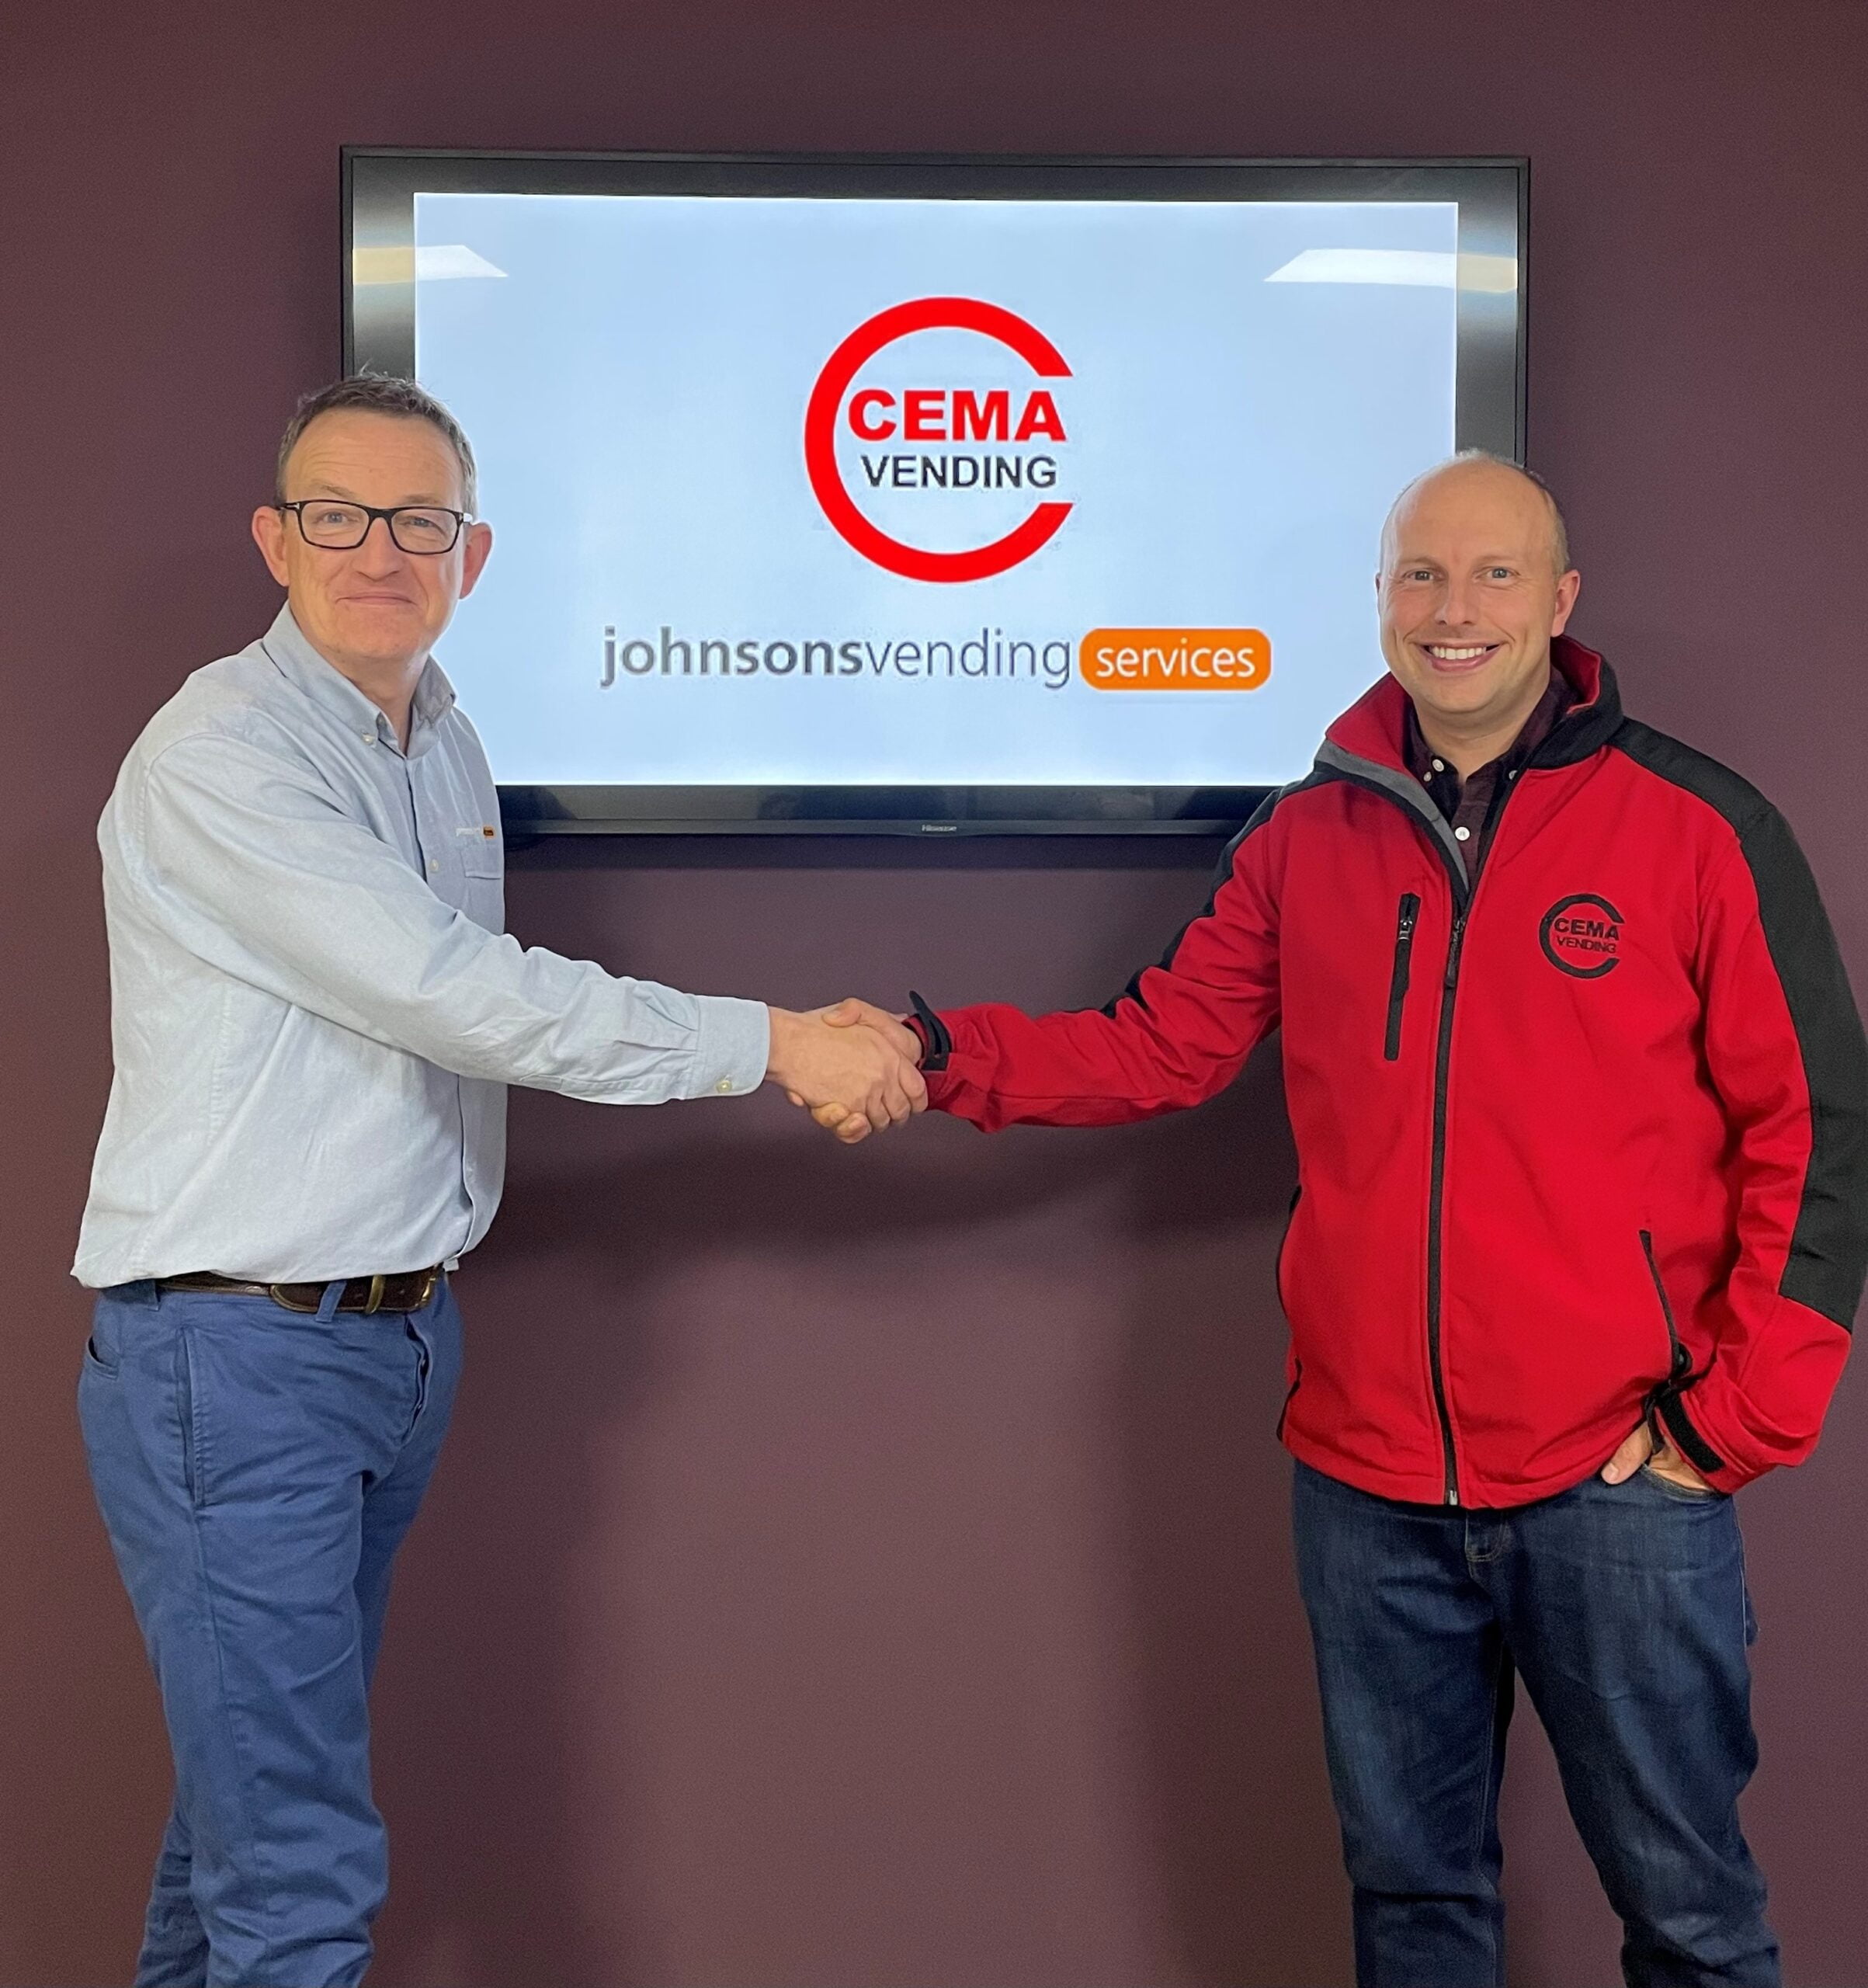 Johnsons vending and Cema vending join forces